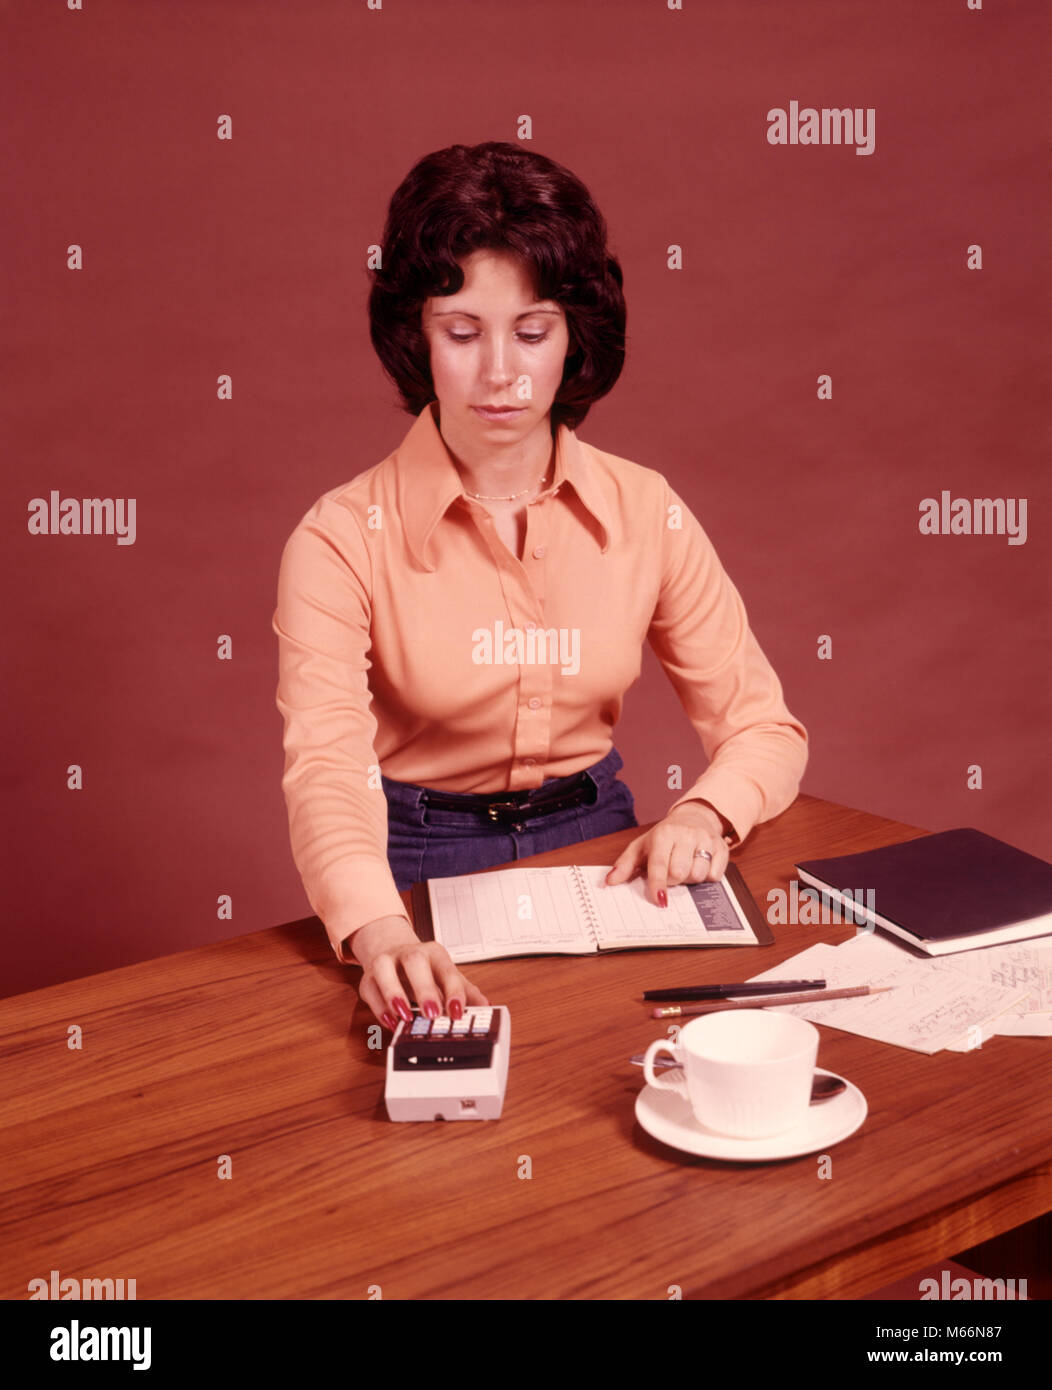 1970s YOUNG WOMAN SITTING AT DESK USING CALCULATOR TO BALANCE BUDGET - ks12329 HAR001 HARS GROWN-UP INDOORS PORTABLE NOSTALGIA 20-25 YEARS 25-30 YEARS HOMEMAKER YOUNGSTER HOMEMAKERS CHECKBOOK LABOR EMPLOYMENT HOUSEWIVES SMALL GROUP OF OBJECTS EMPLOYEE PERSONAL FINANCE ELECTRONIC MID-ADULT MID-ADULT WOMAN PEOPLE ADULTS TAXES CALCULATING CAUCASIAN ETHNICITY LABORING OLD FASHIONED PERSONS SAUCER Stock Photo